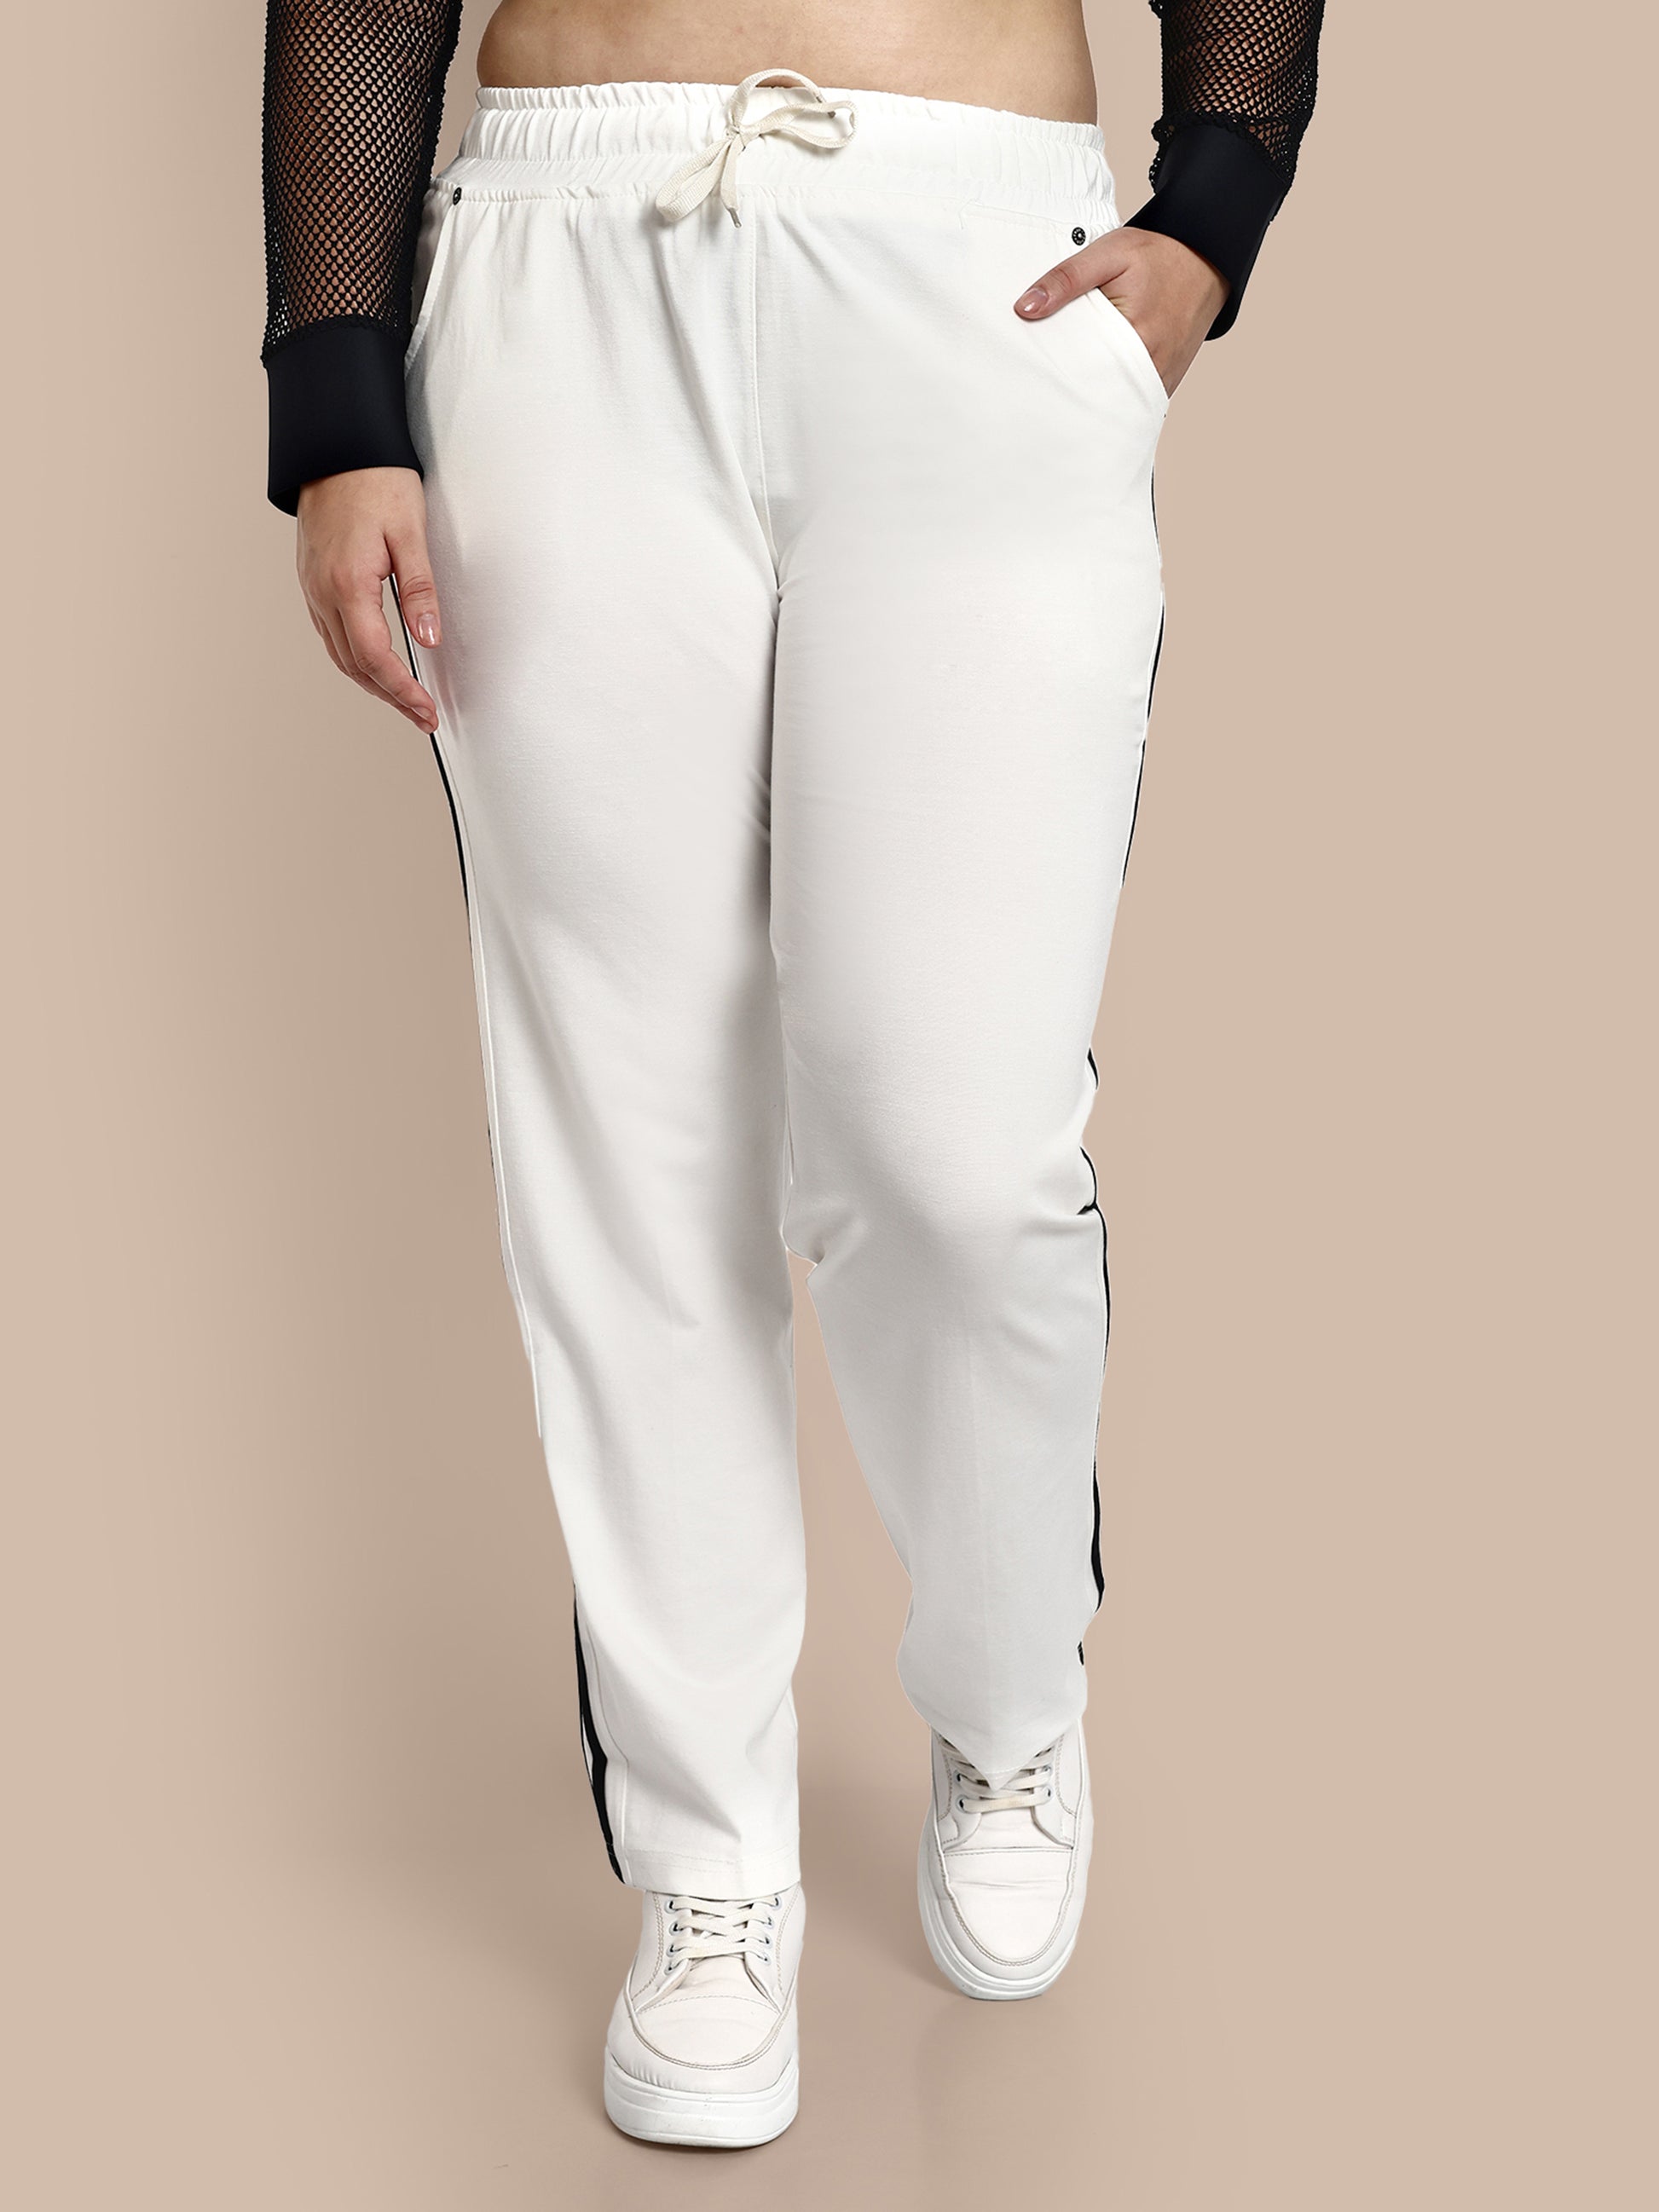 Buy Comfy Side Stripes Jogger Pants for Women online in India